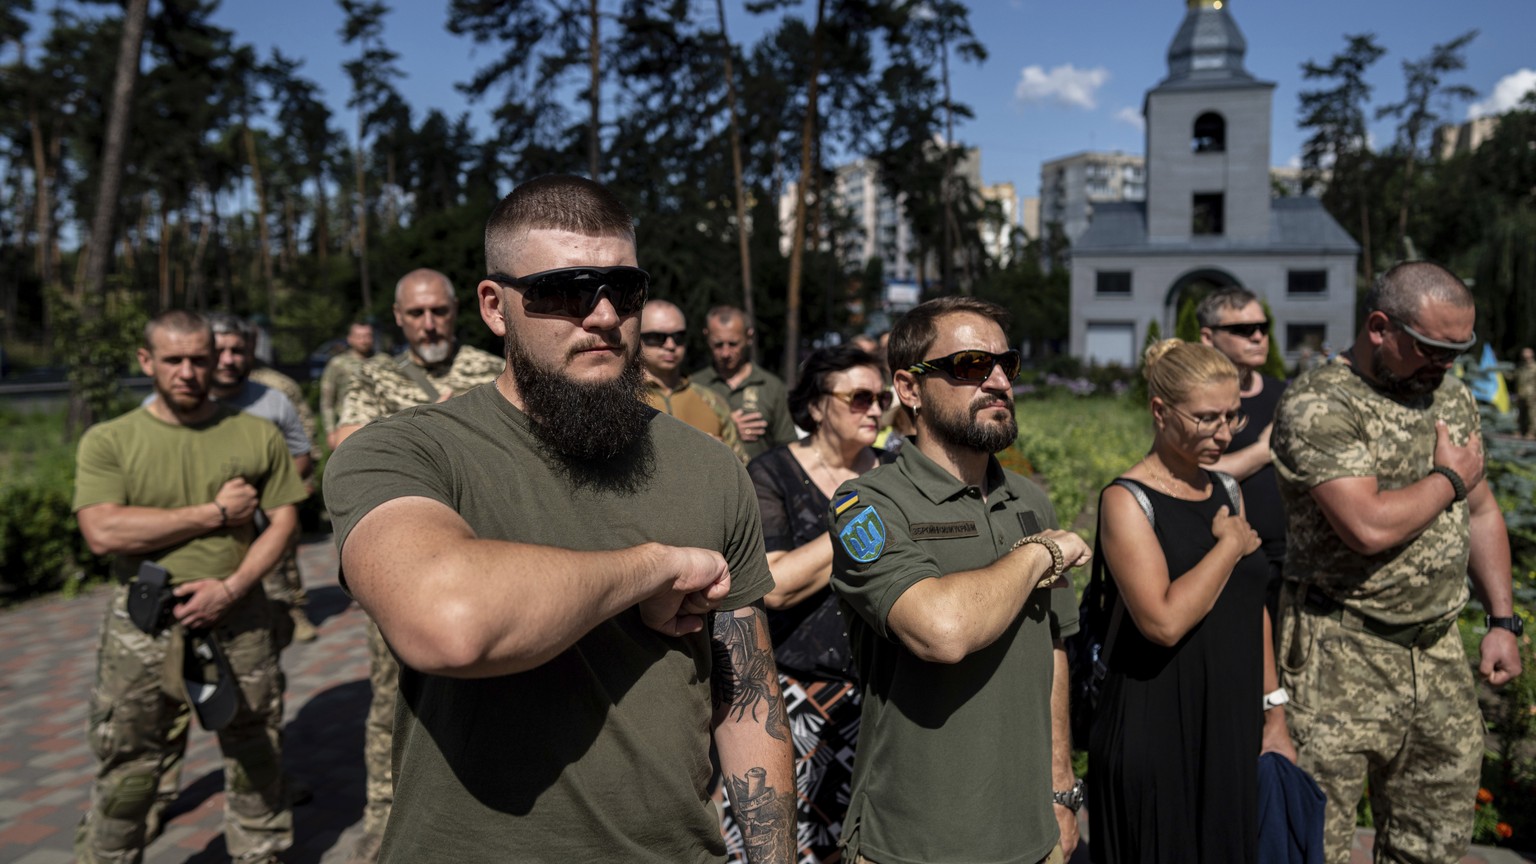 Ukrainian servicemen attend a farewell ceremony of their fallen comrade Nicholas Maimer, a U.S. citizen and Army veteran who was killed during fighting in Bakhmut against Russian forces, in Ukrajinka, ...